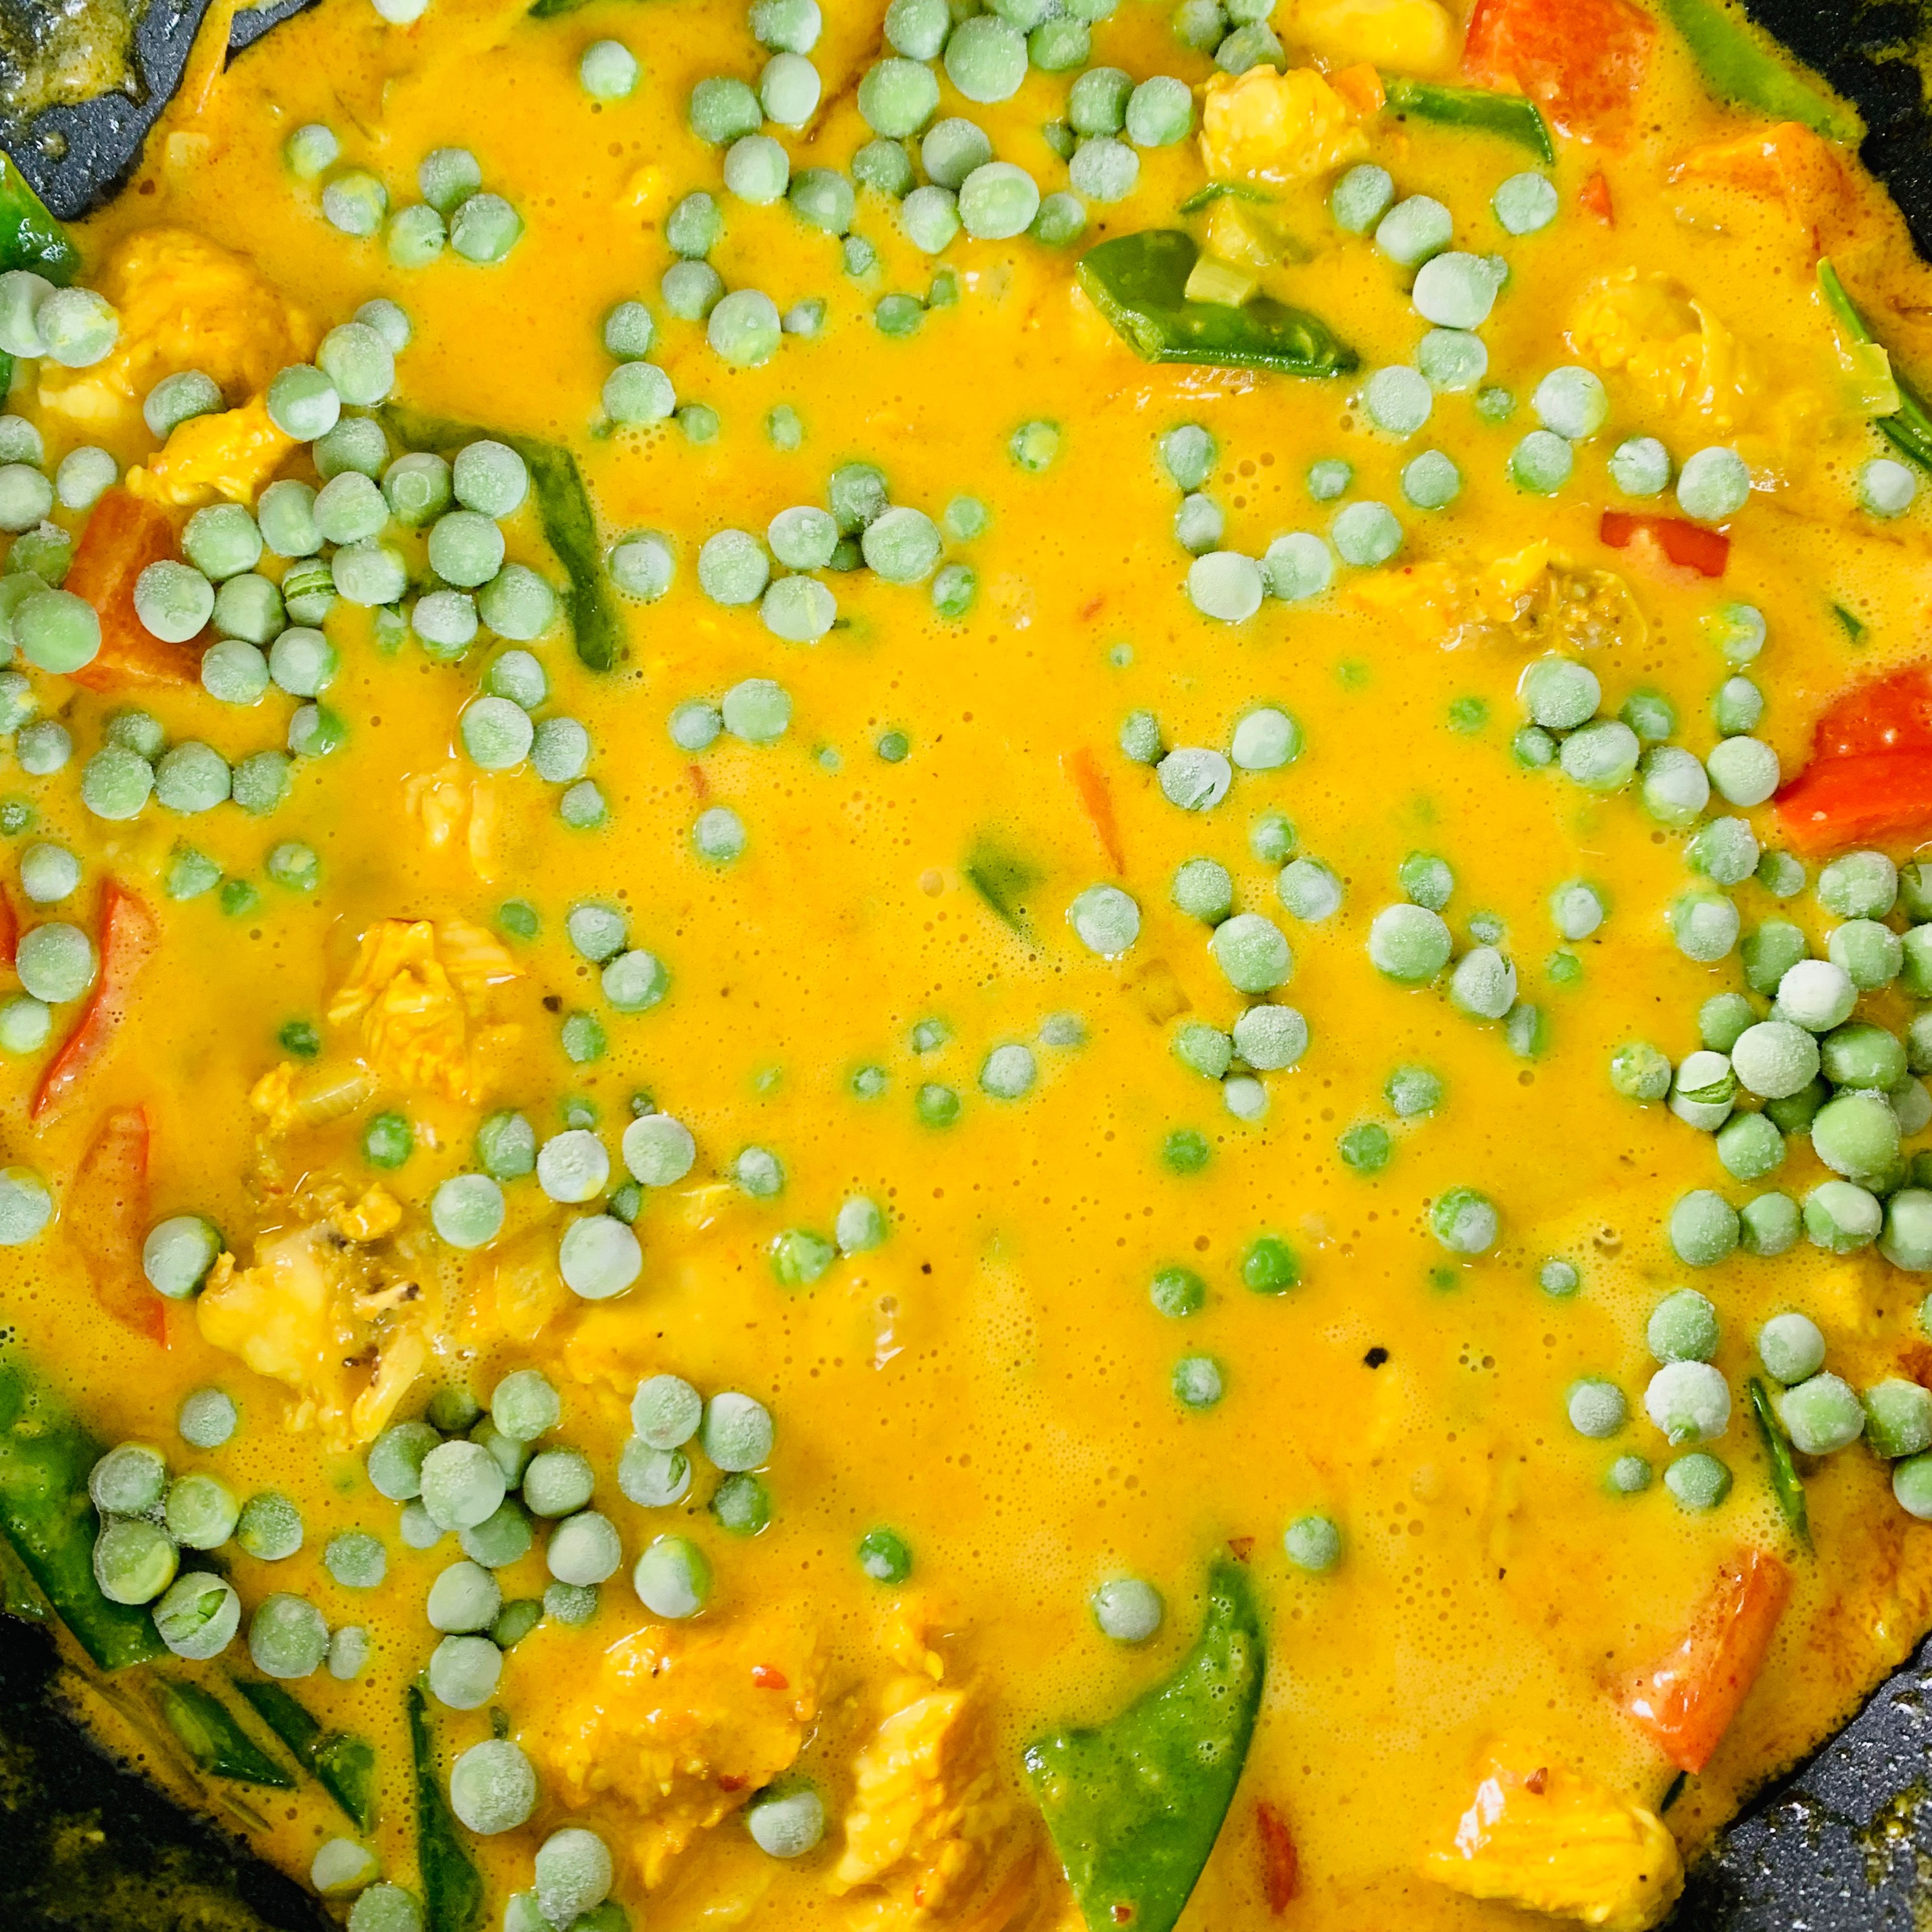 Add the frozen peas as well and simmer for 5-7 minutes 